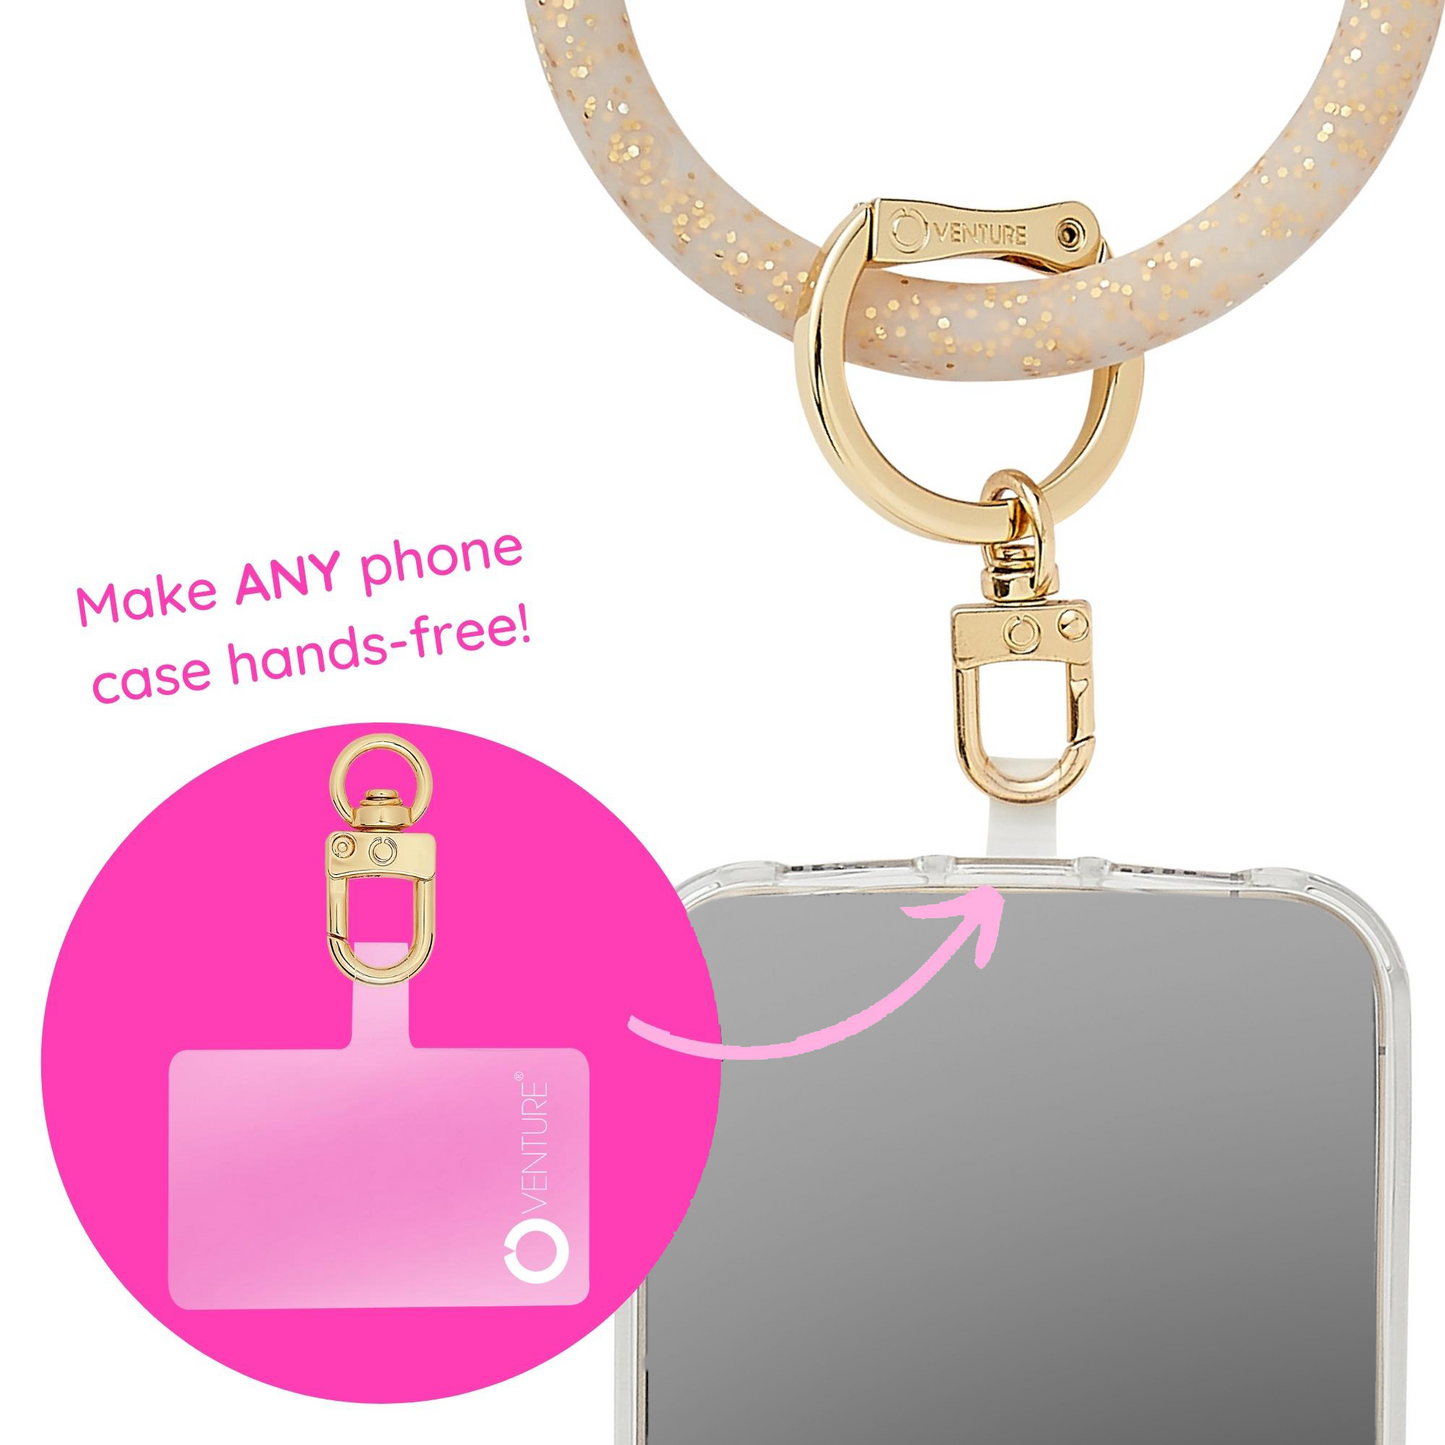 Gold Rush - The Hook Me Up™ Universal Phone Connector - Oventure The Oventure phone connector is a connector that sticks inside your phone case and attaches to your big o keyring.